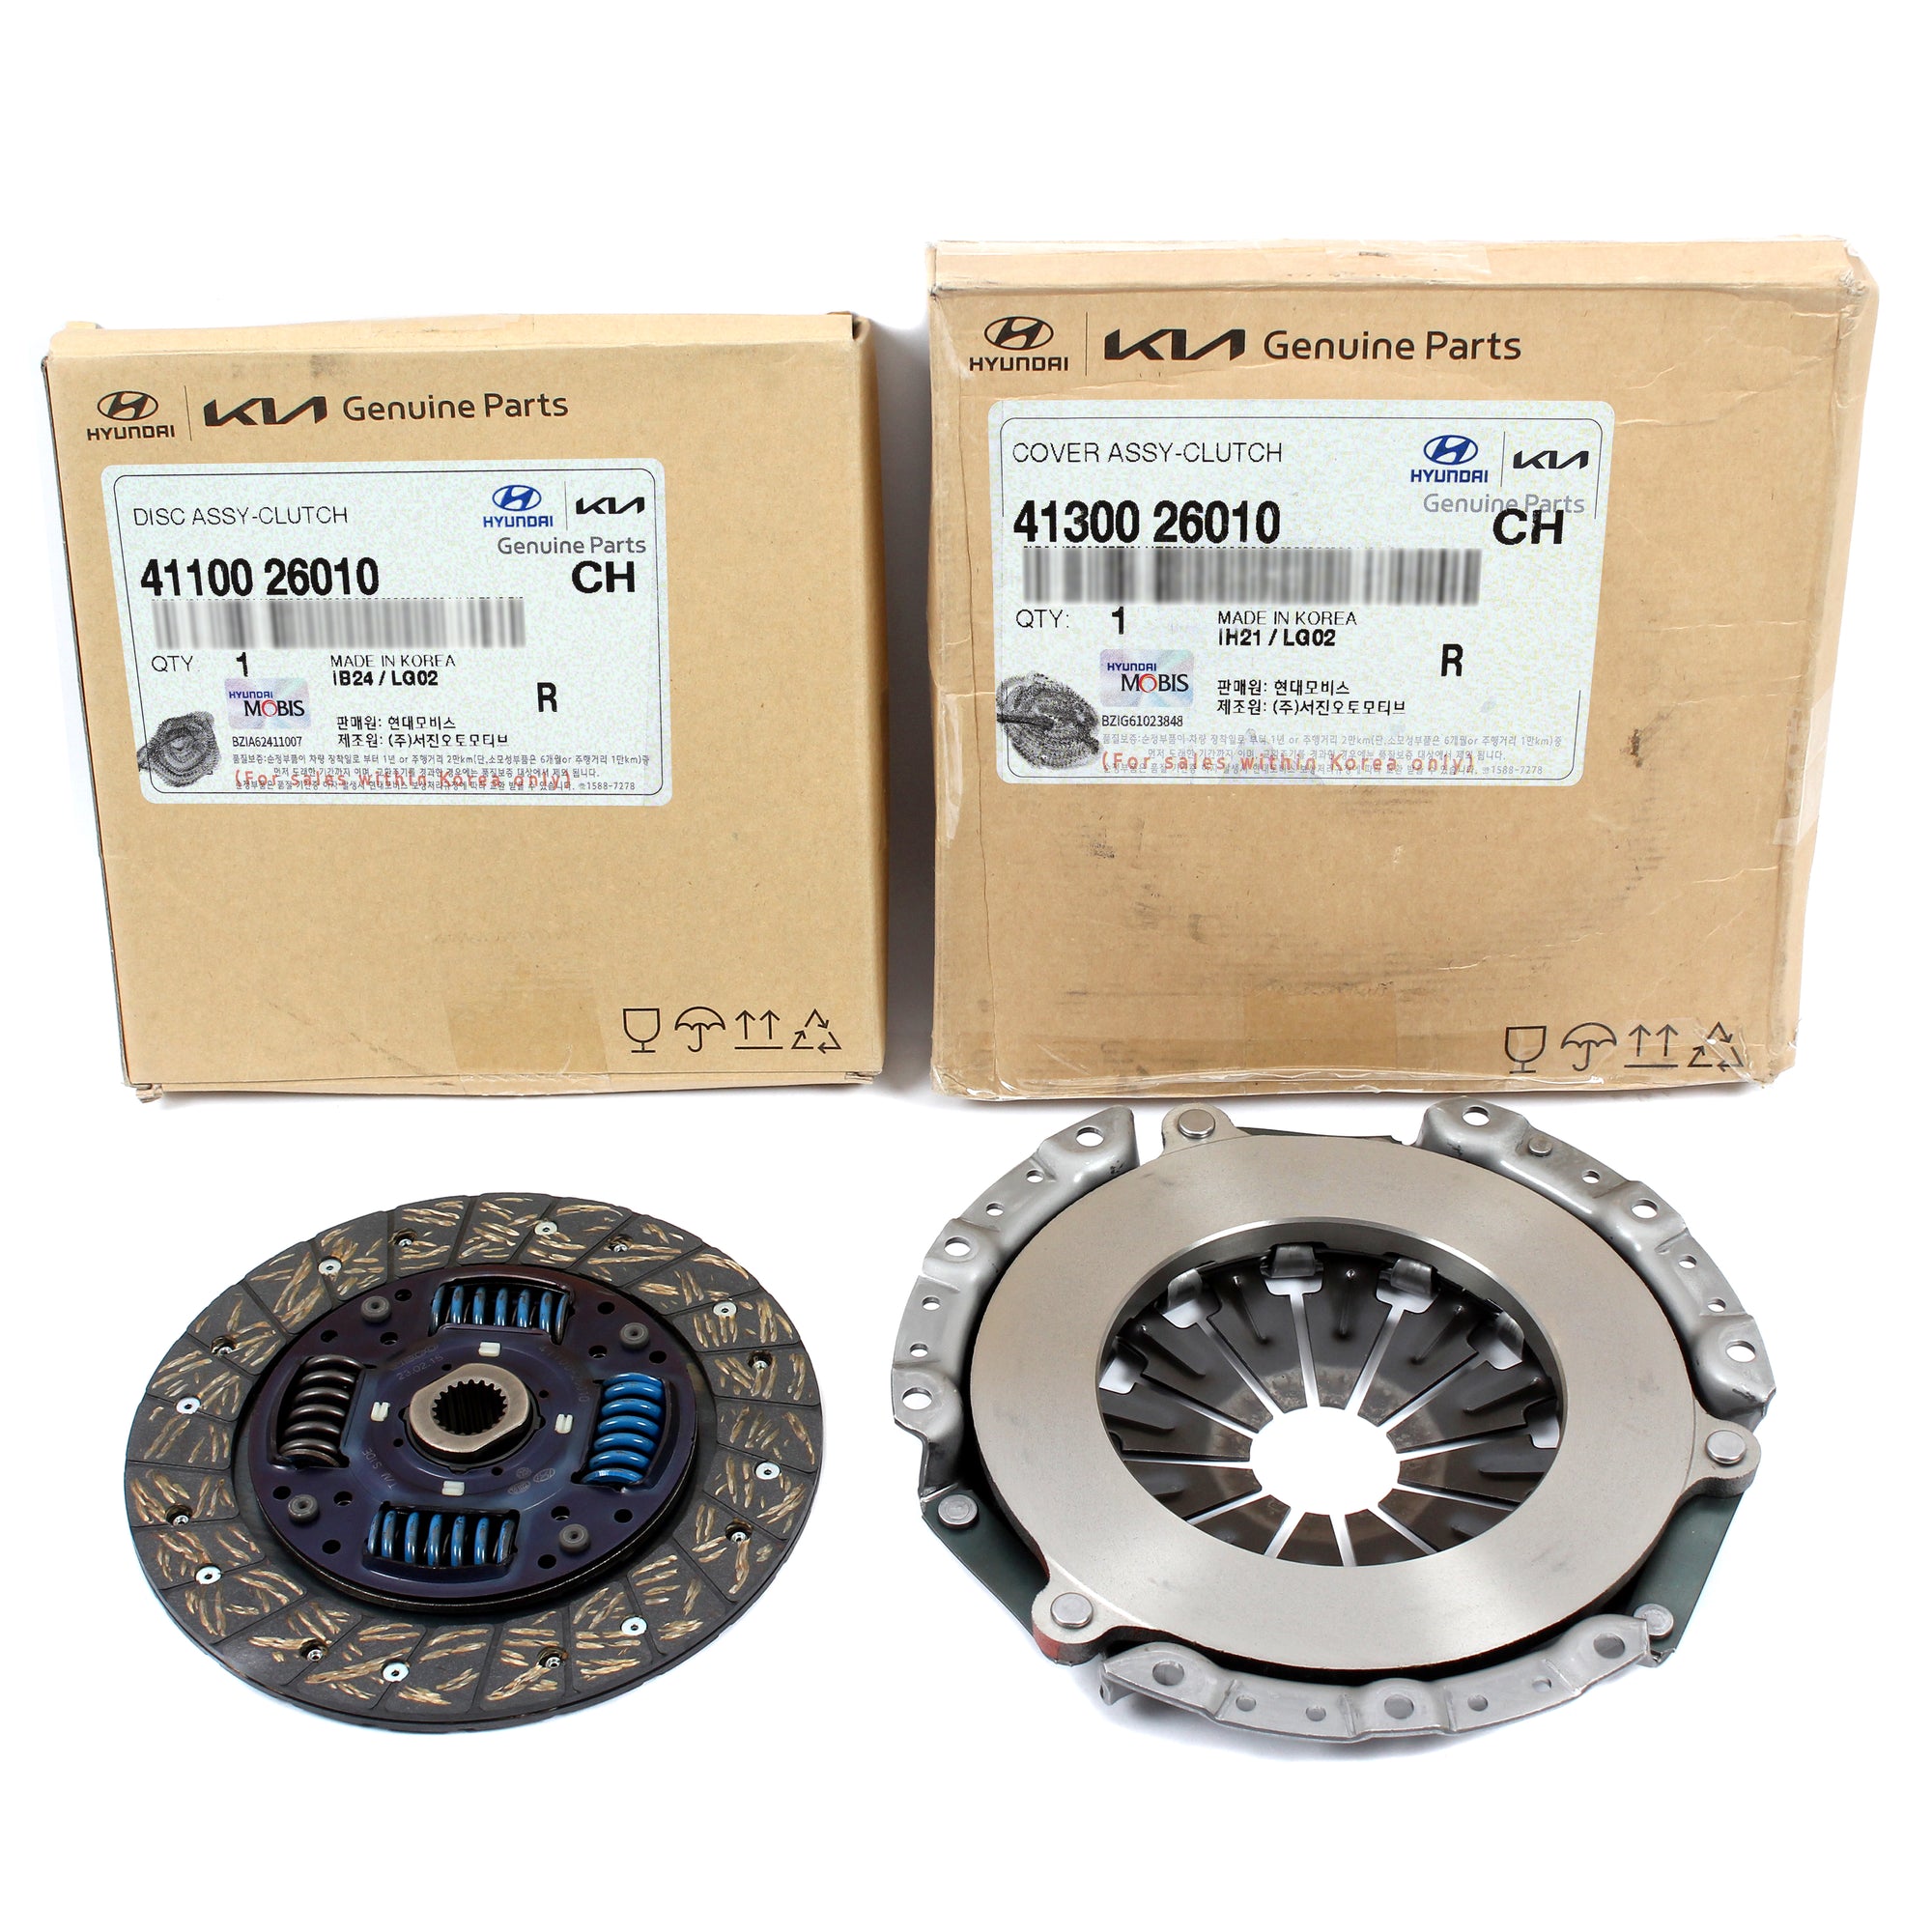 GENUINE Clutch Disc & Cover Plate Kit for 2012-2015 Accent Veloster Rio 1.6L